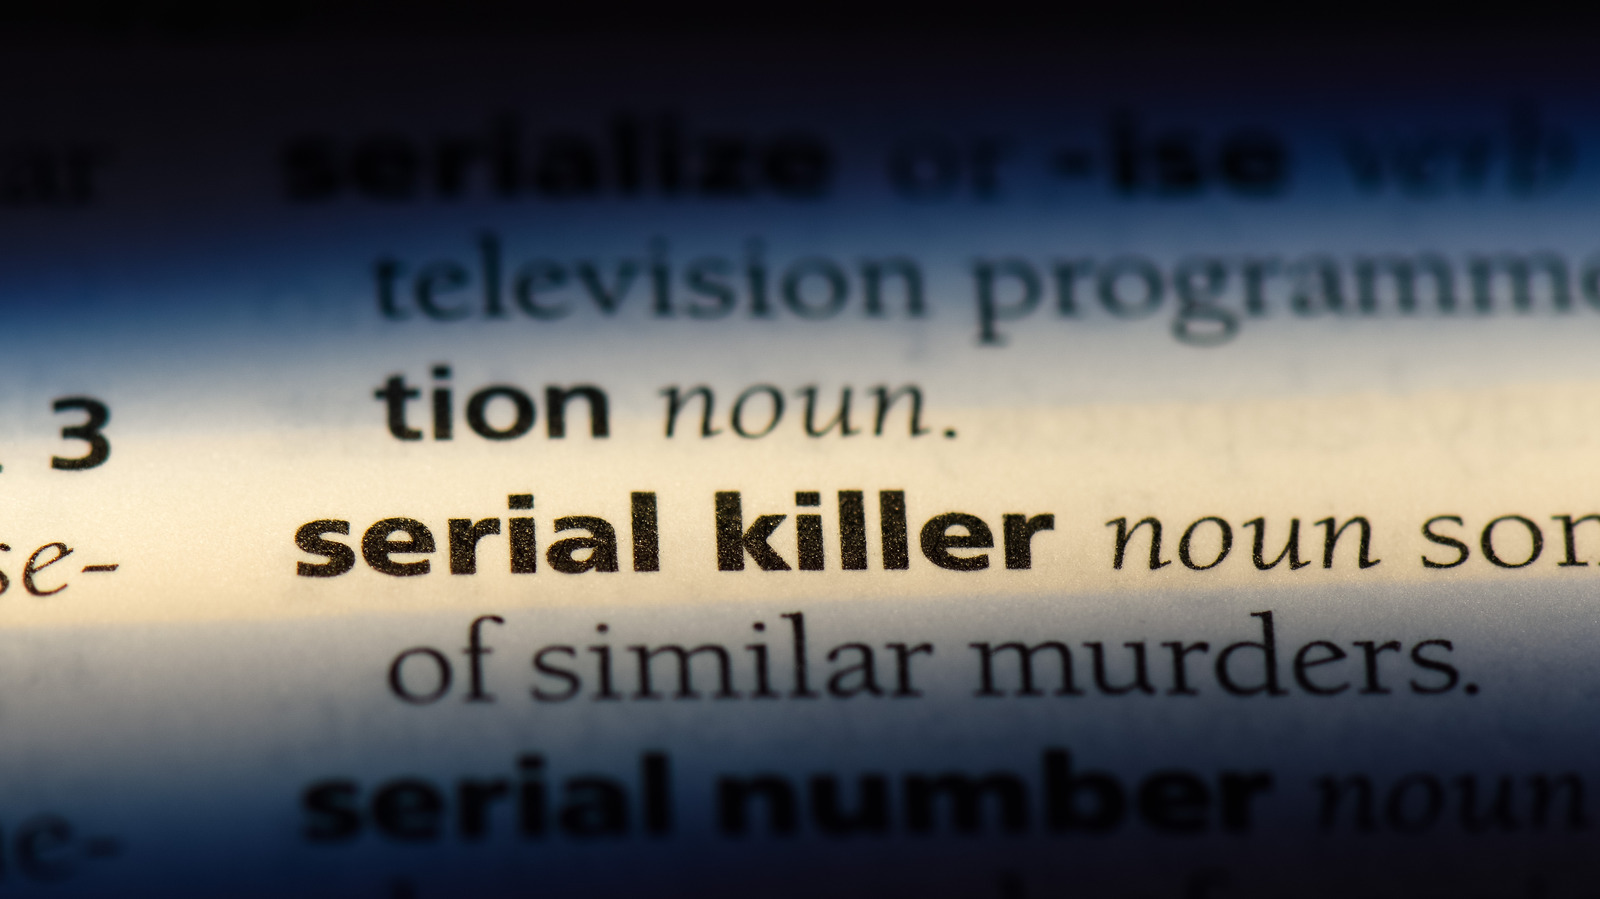 what makes a serial killer different than one time murderer